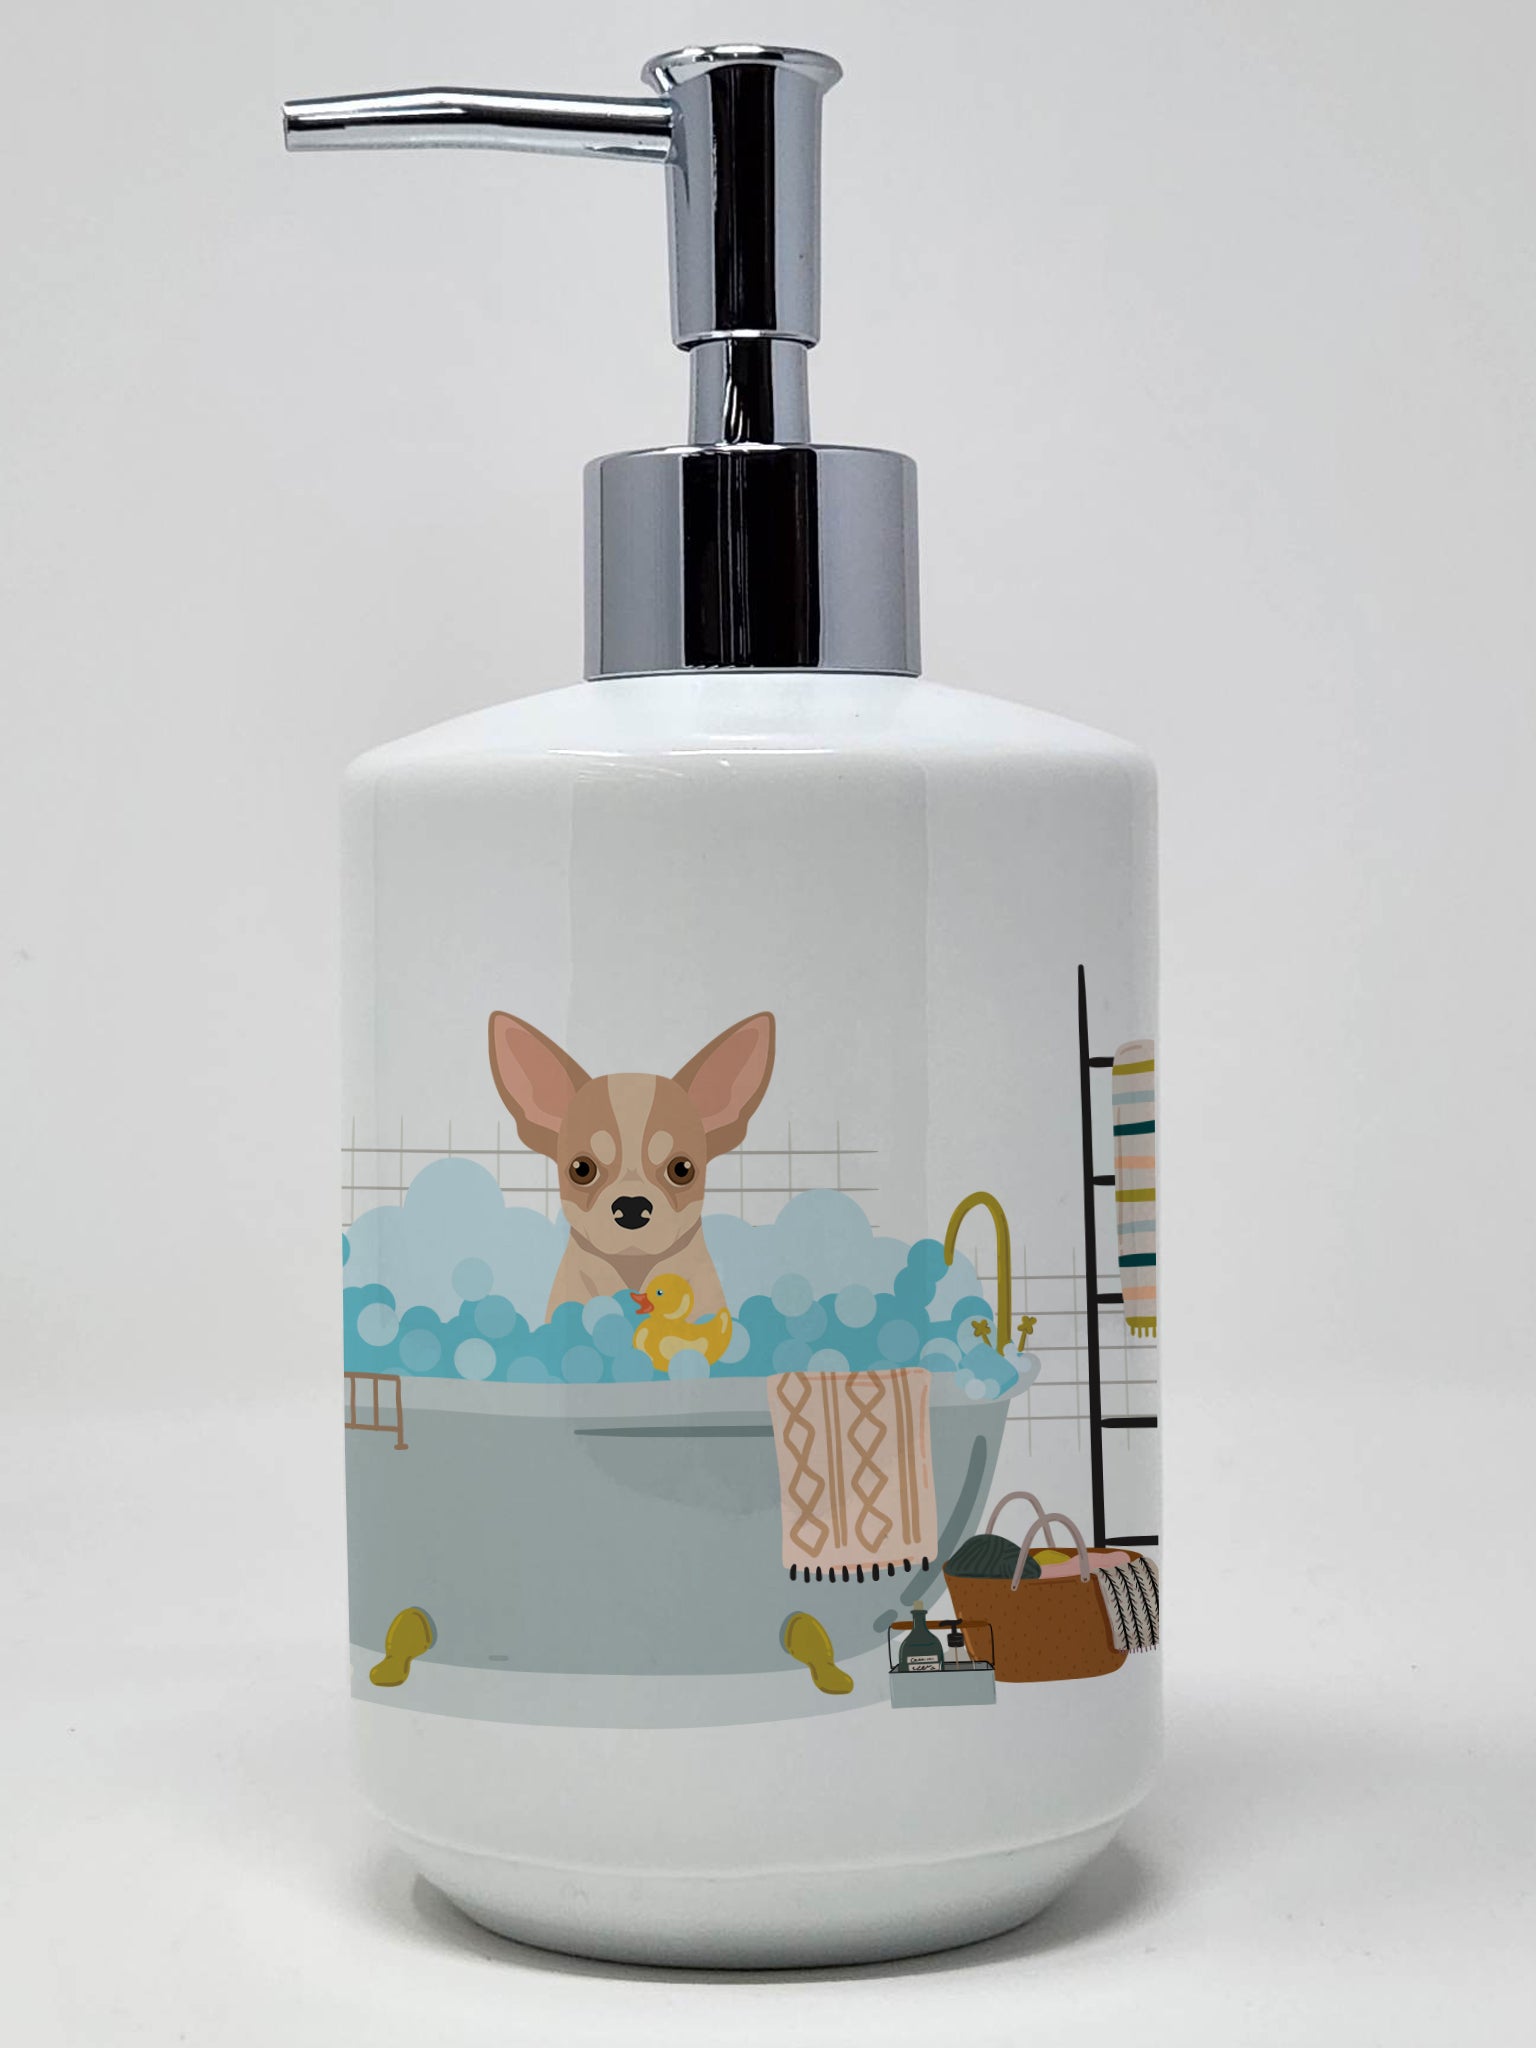 Buy this Fawn and White Chihuahua Ceramic Soap Dispenser